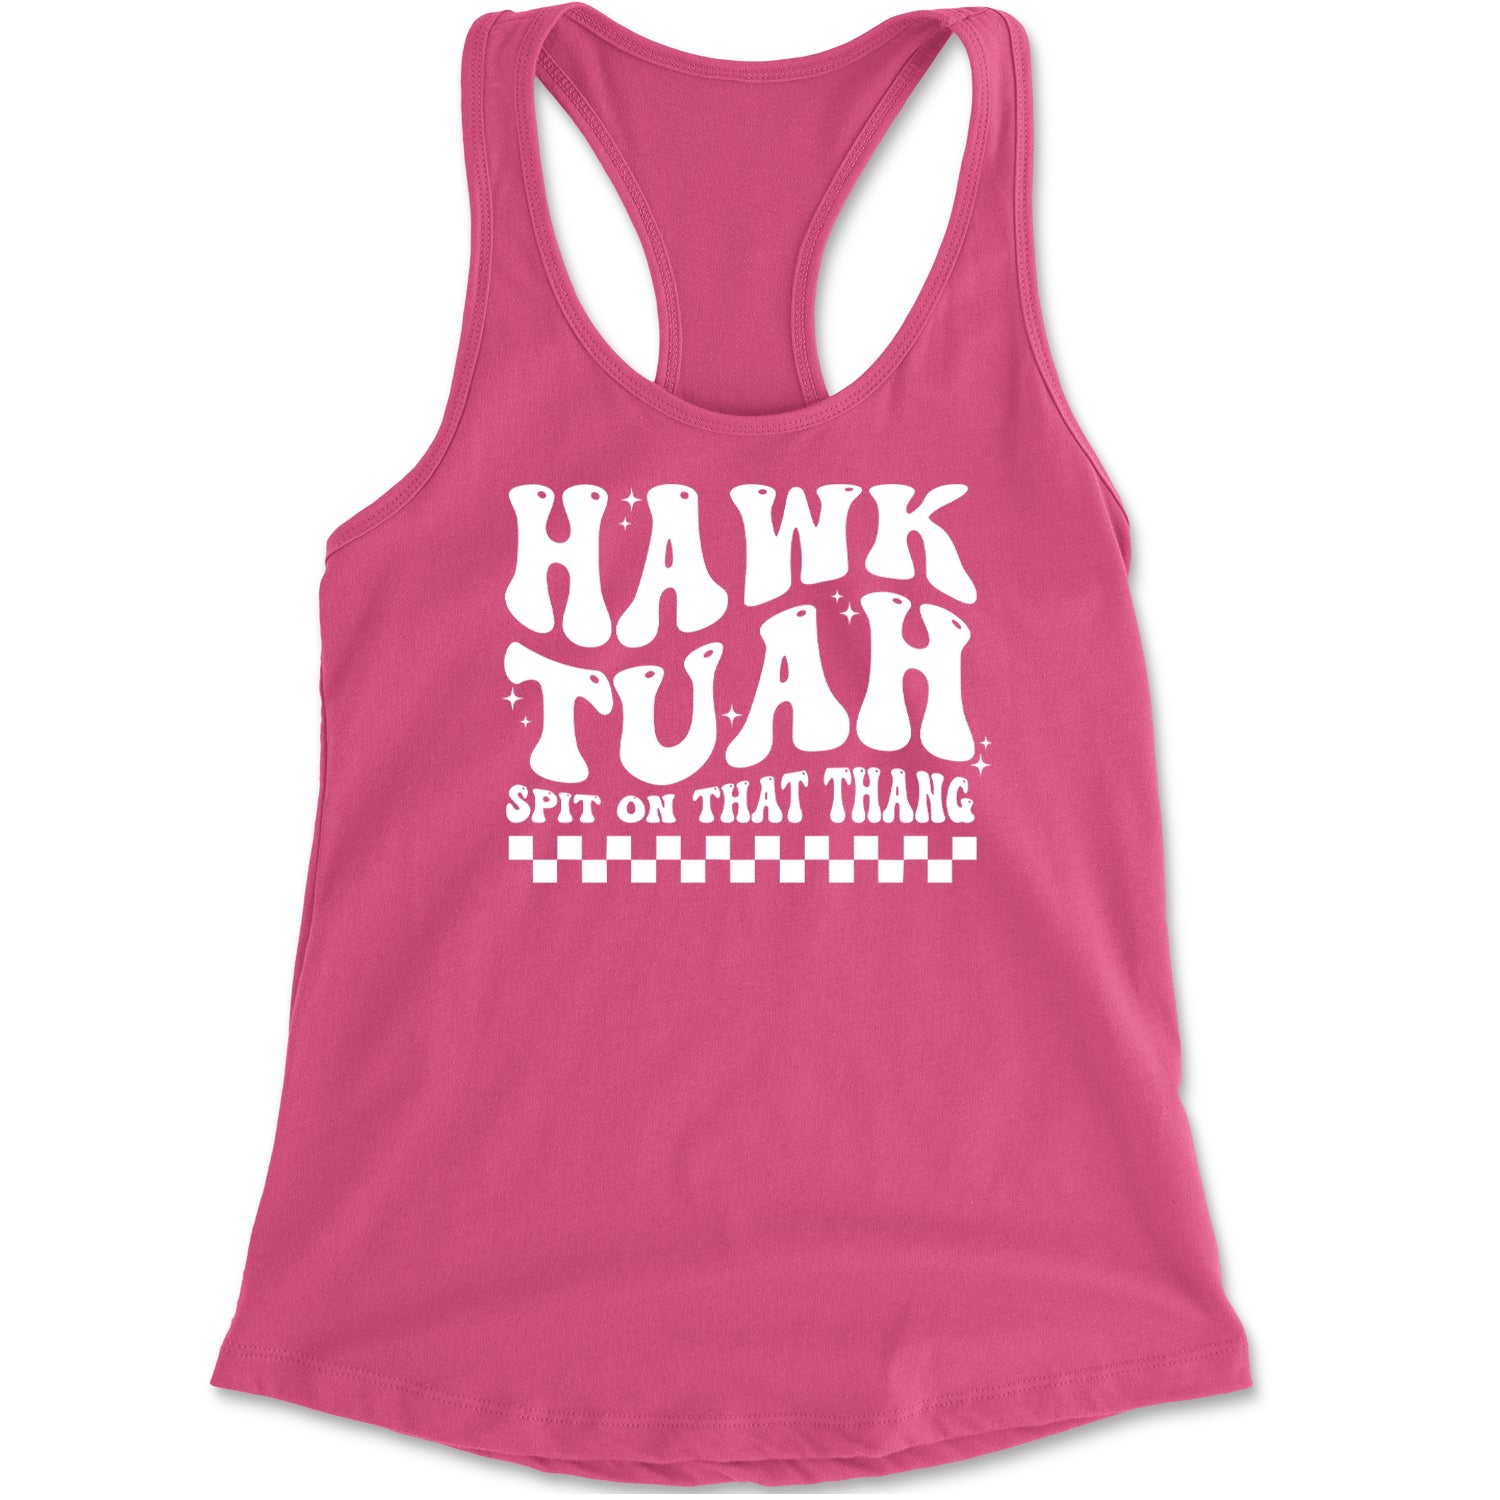 Hawk Tuah Spit On That Thang Racerback Tank Top for Women Hot Pink